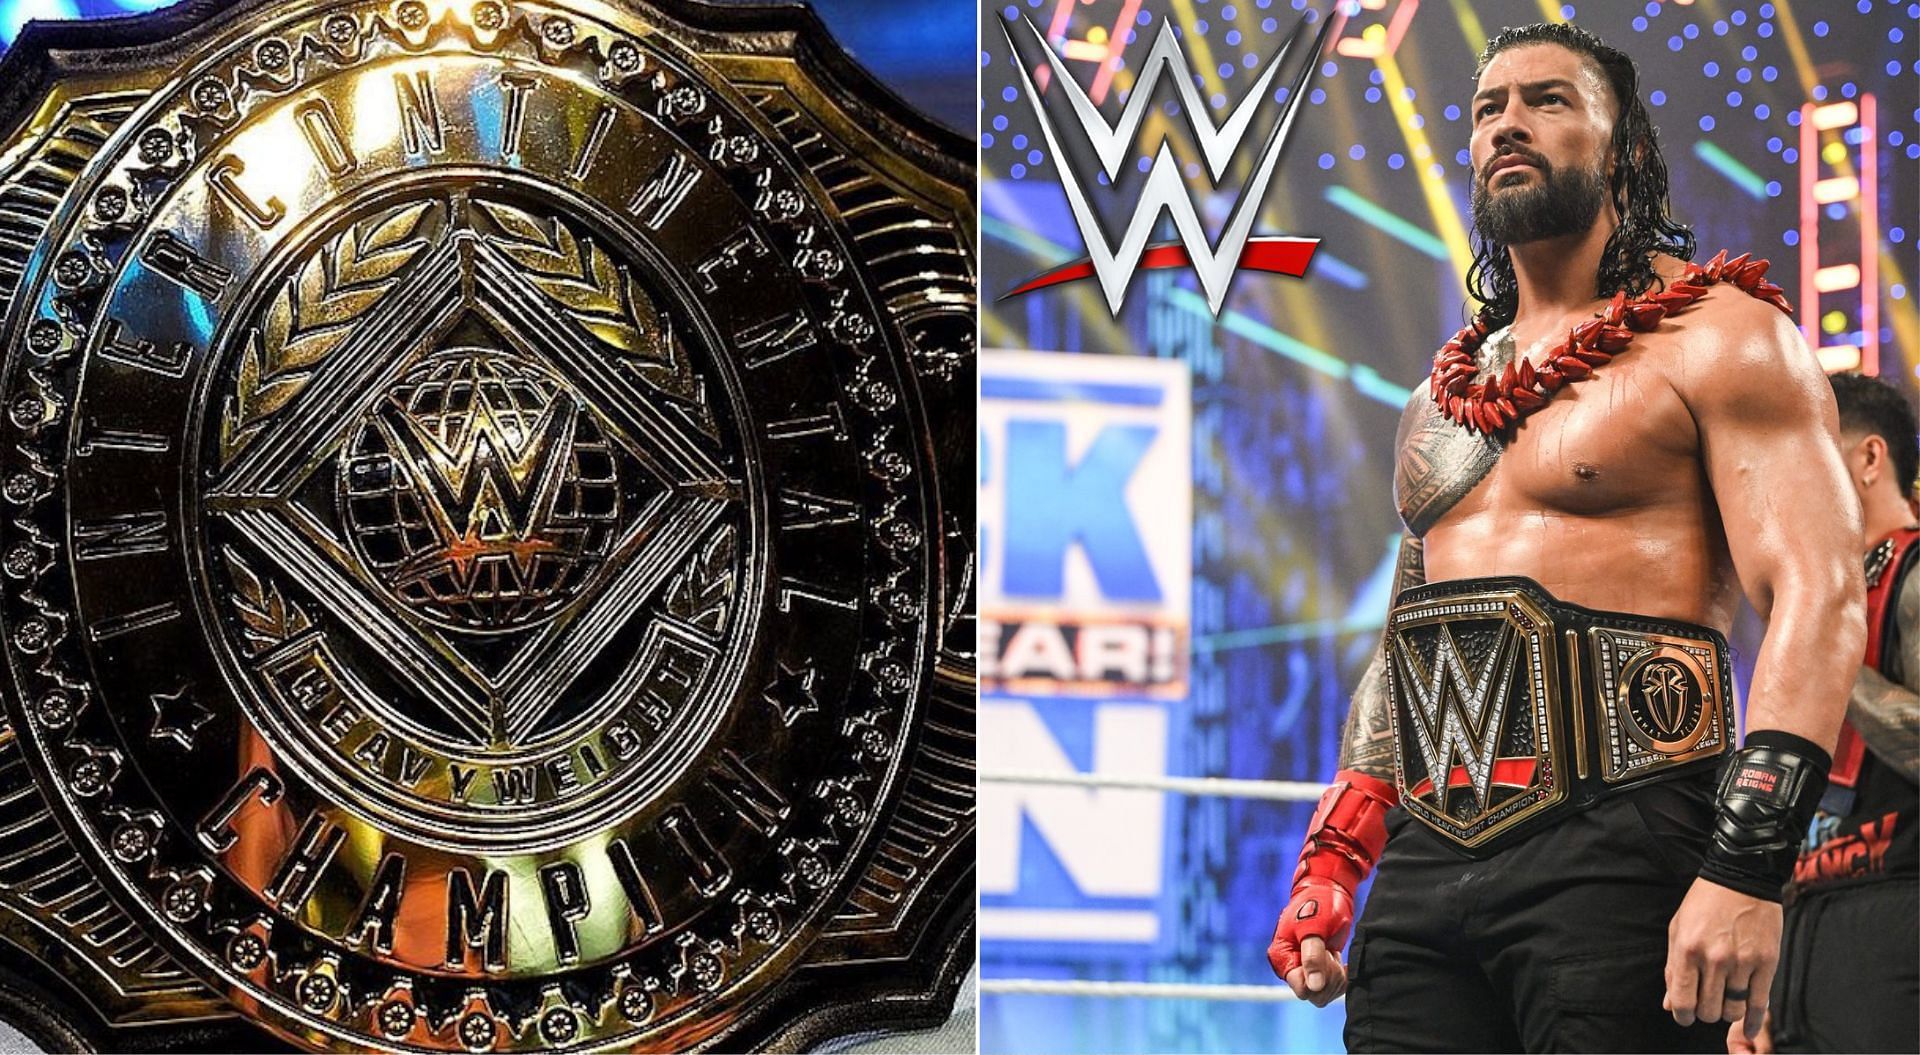 WWE Intercontinental Title (left), Roman Reigns (right)